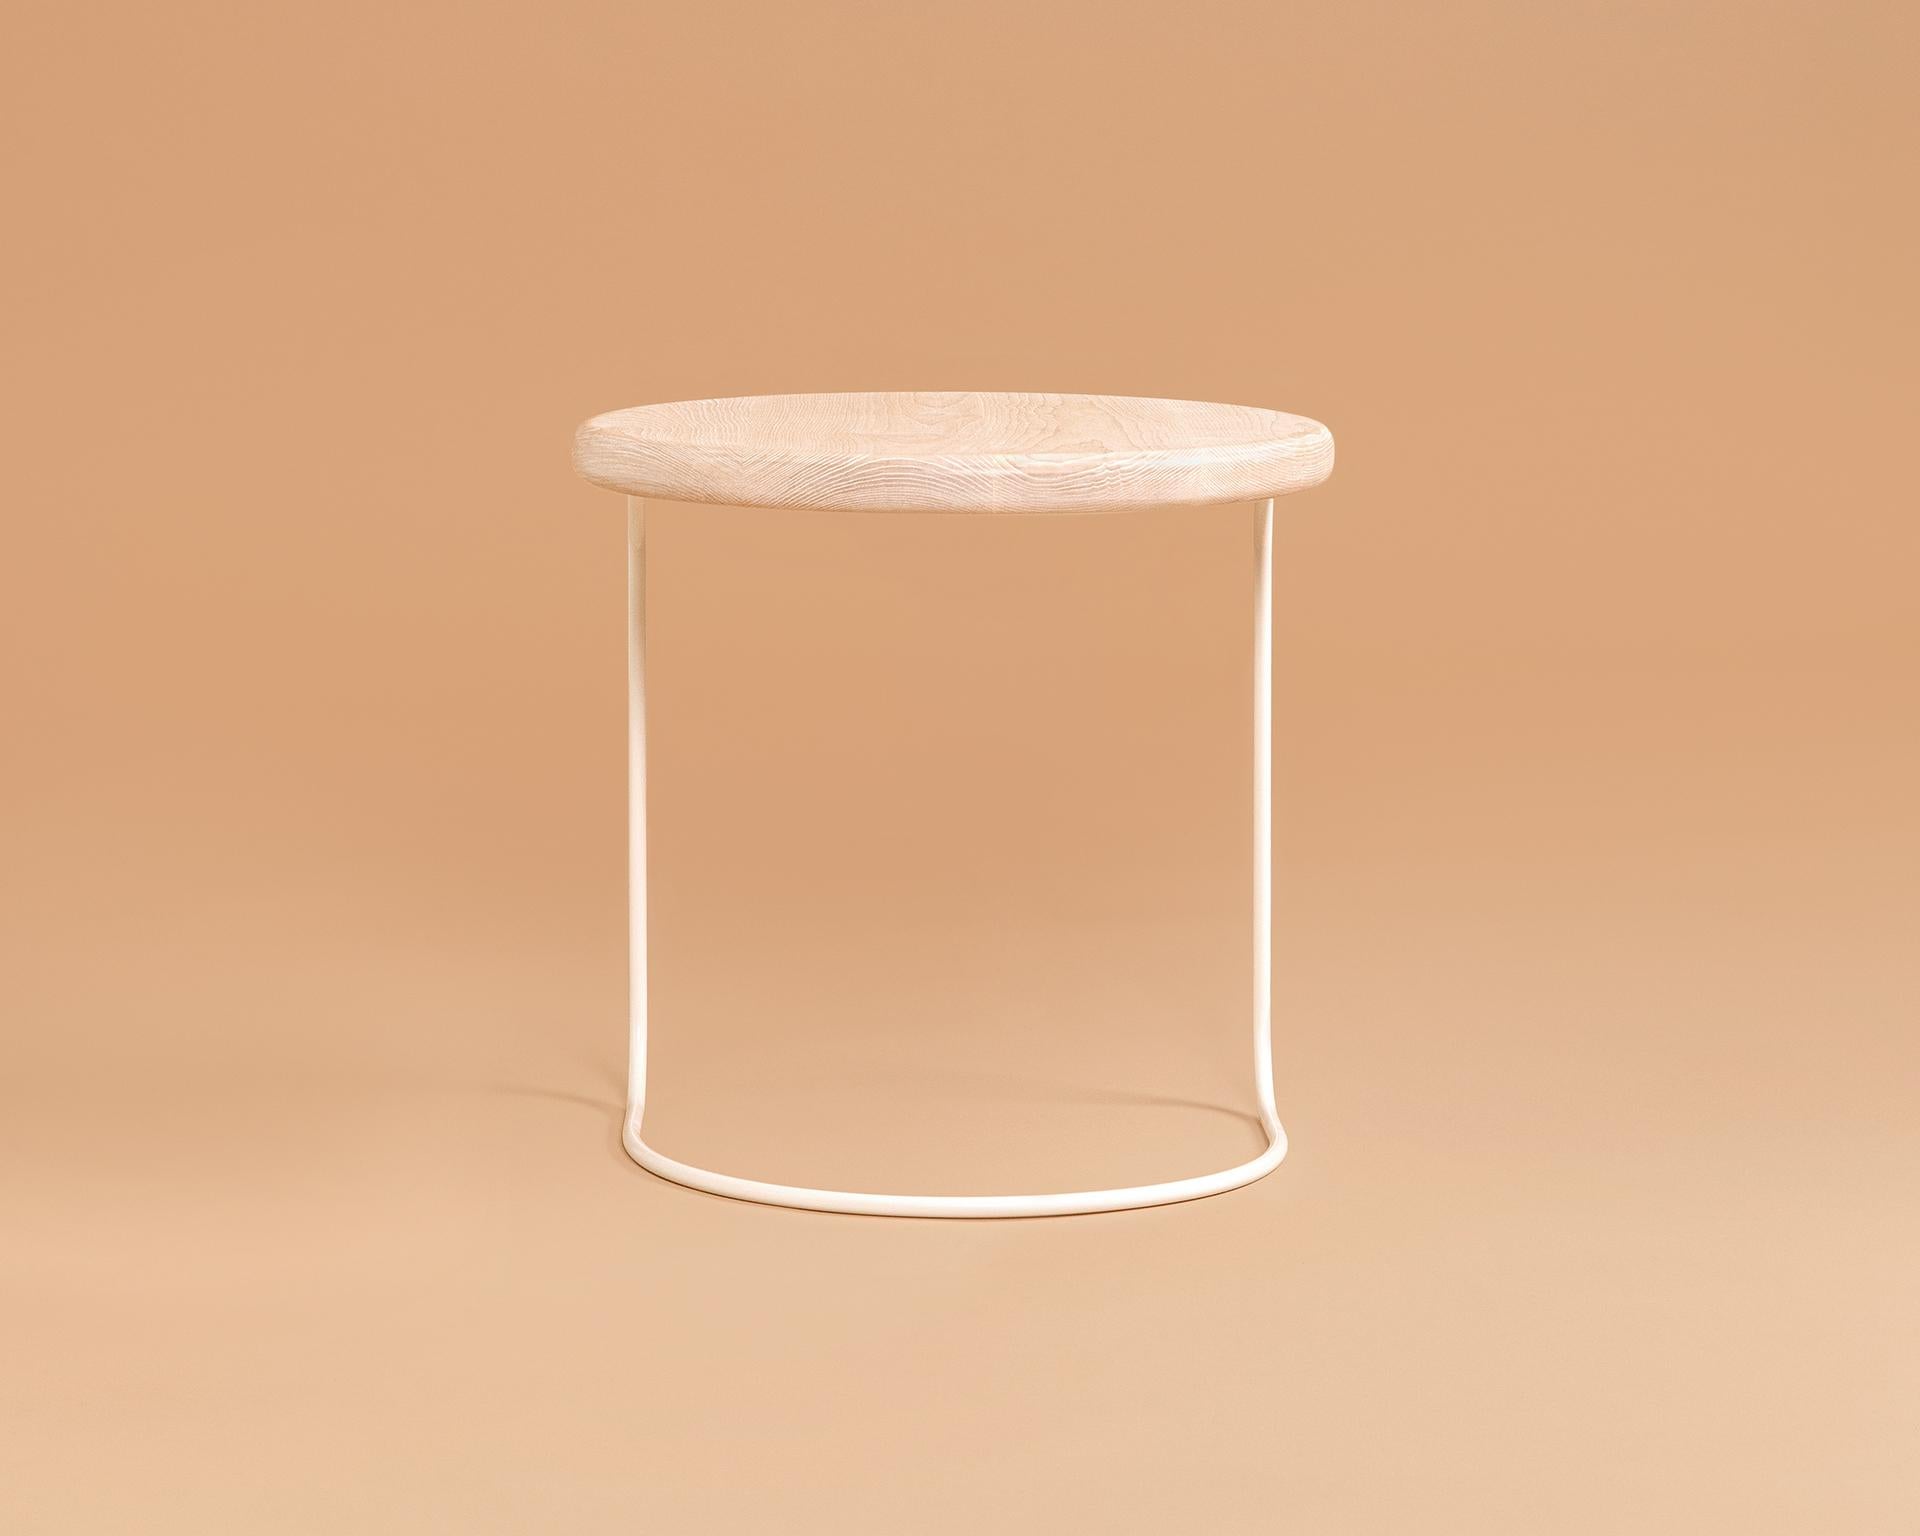 American Contemporary Wood and Metal Round Side Table For Sale